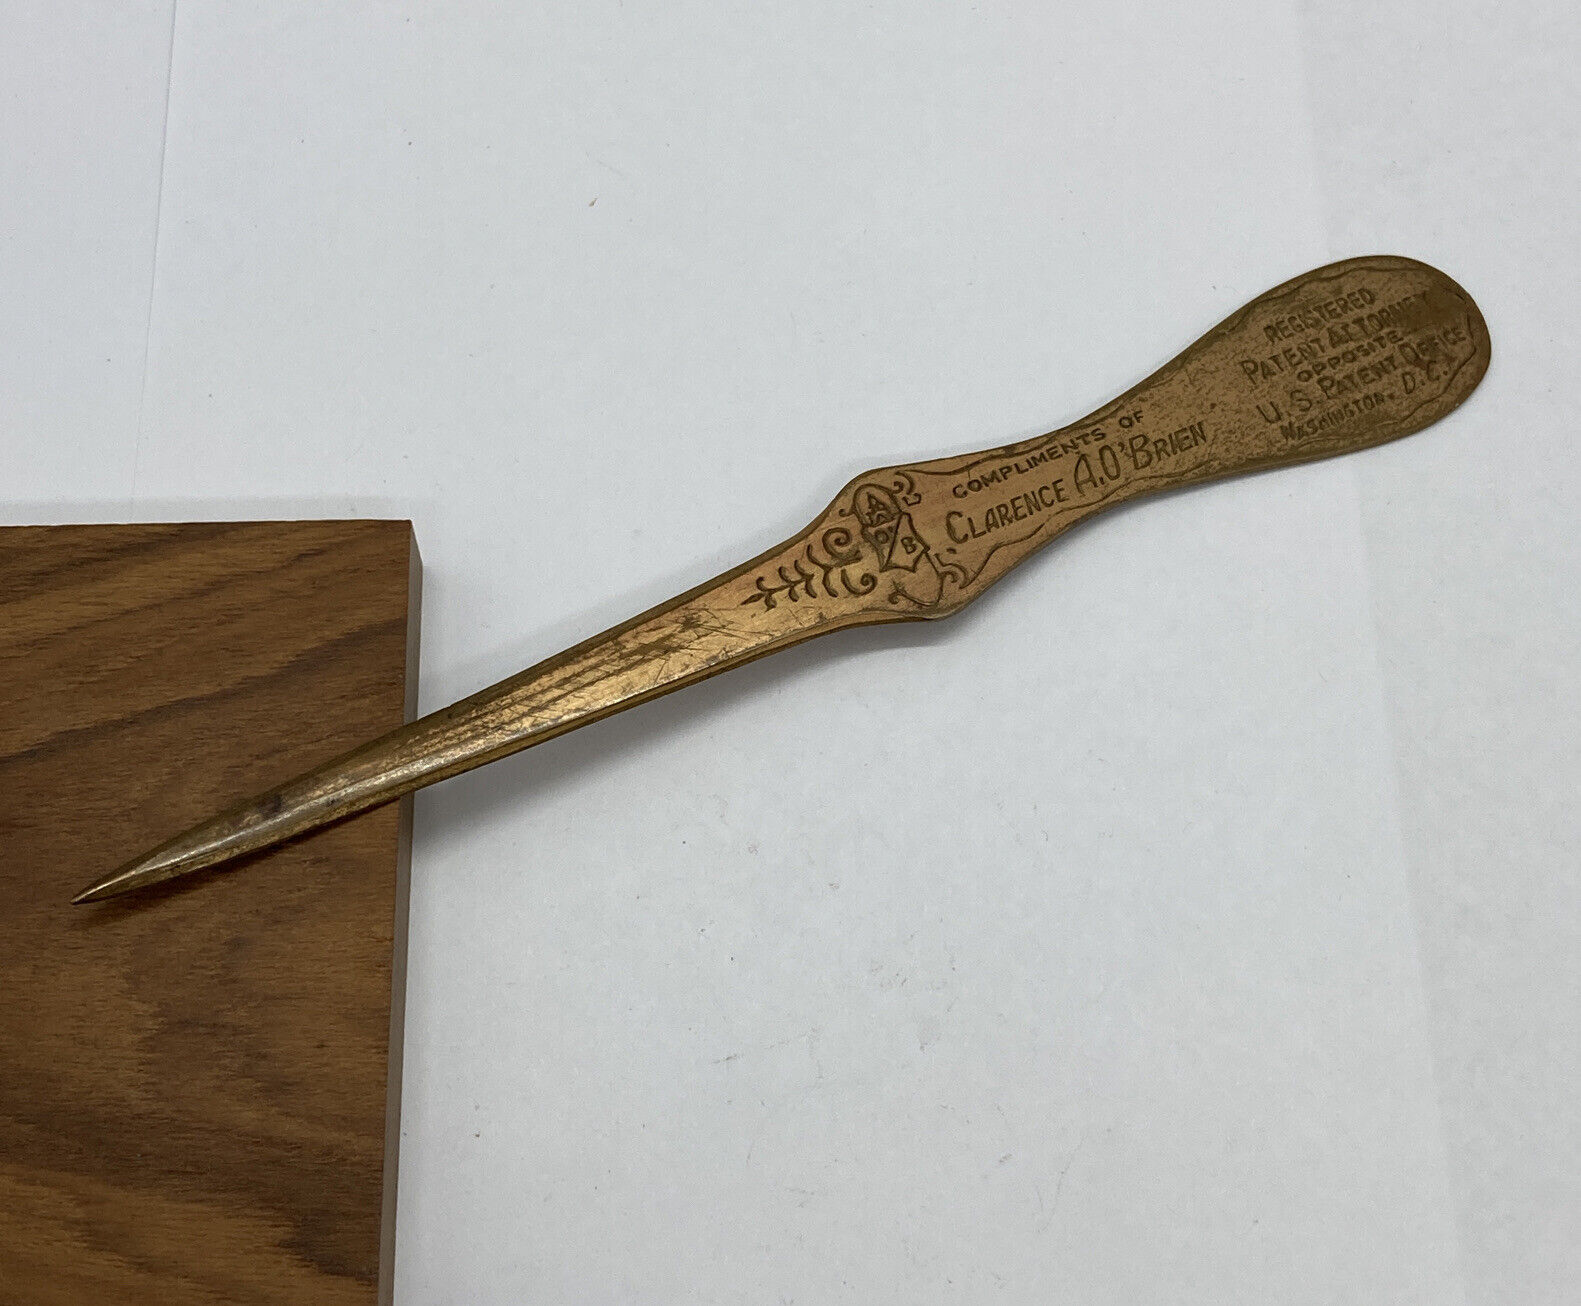 Vintage Letter Opener Clarence A. O'Brien Patent Attorney Washington D.C. Office